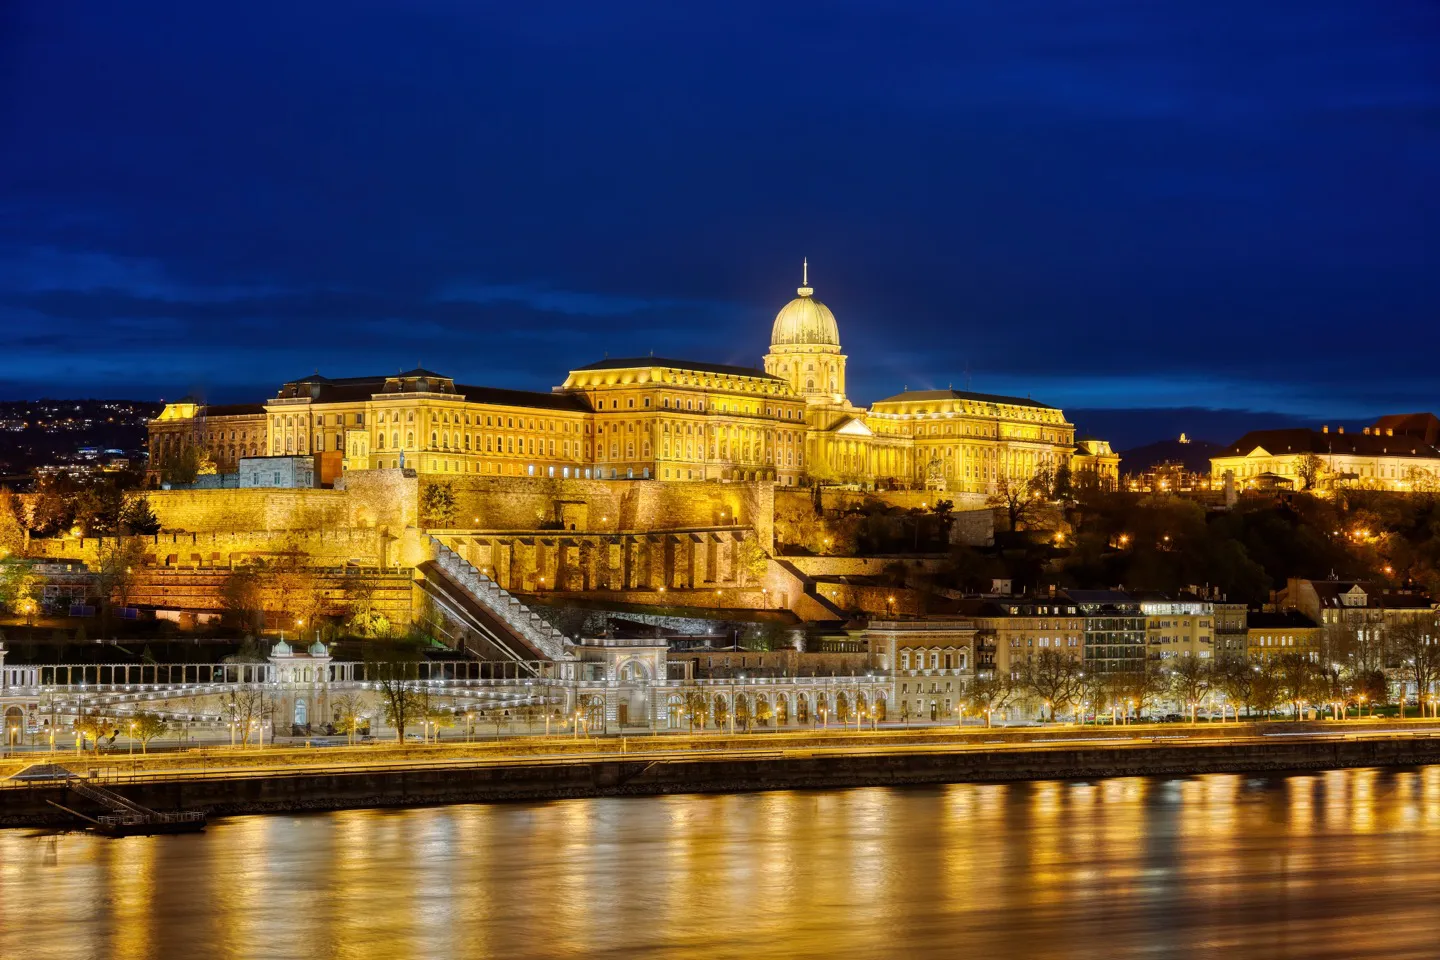 Spend your evenings strolling the Danube on a five-star F1 vacation package to Budapest